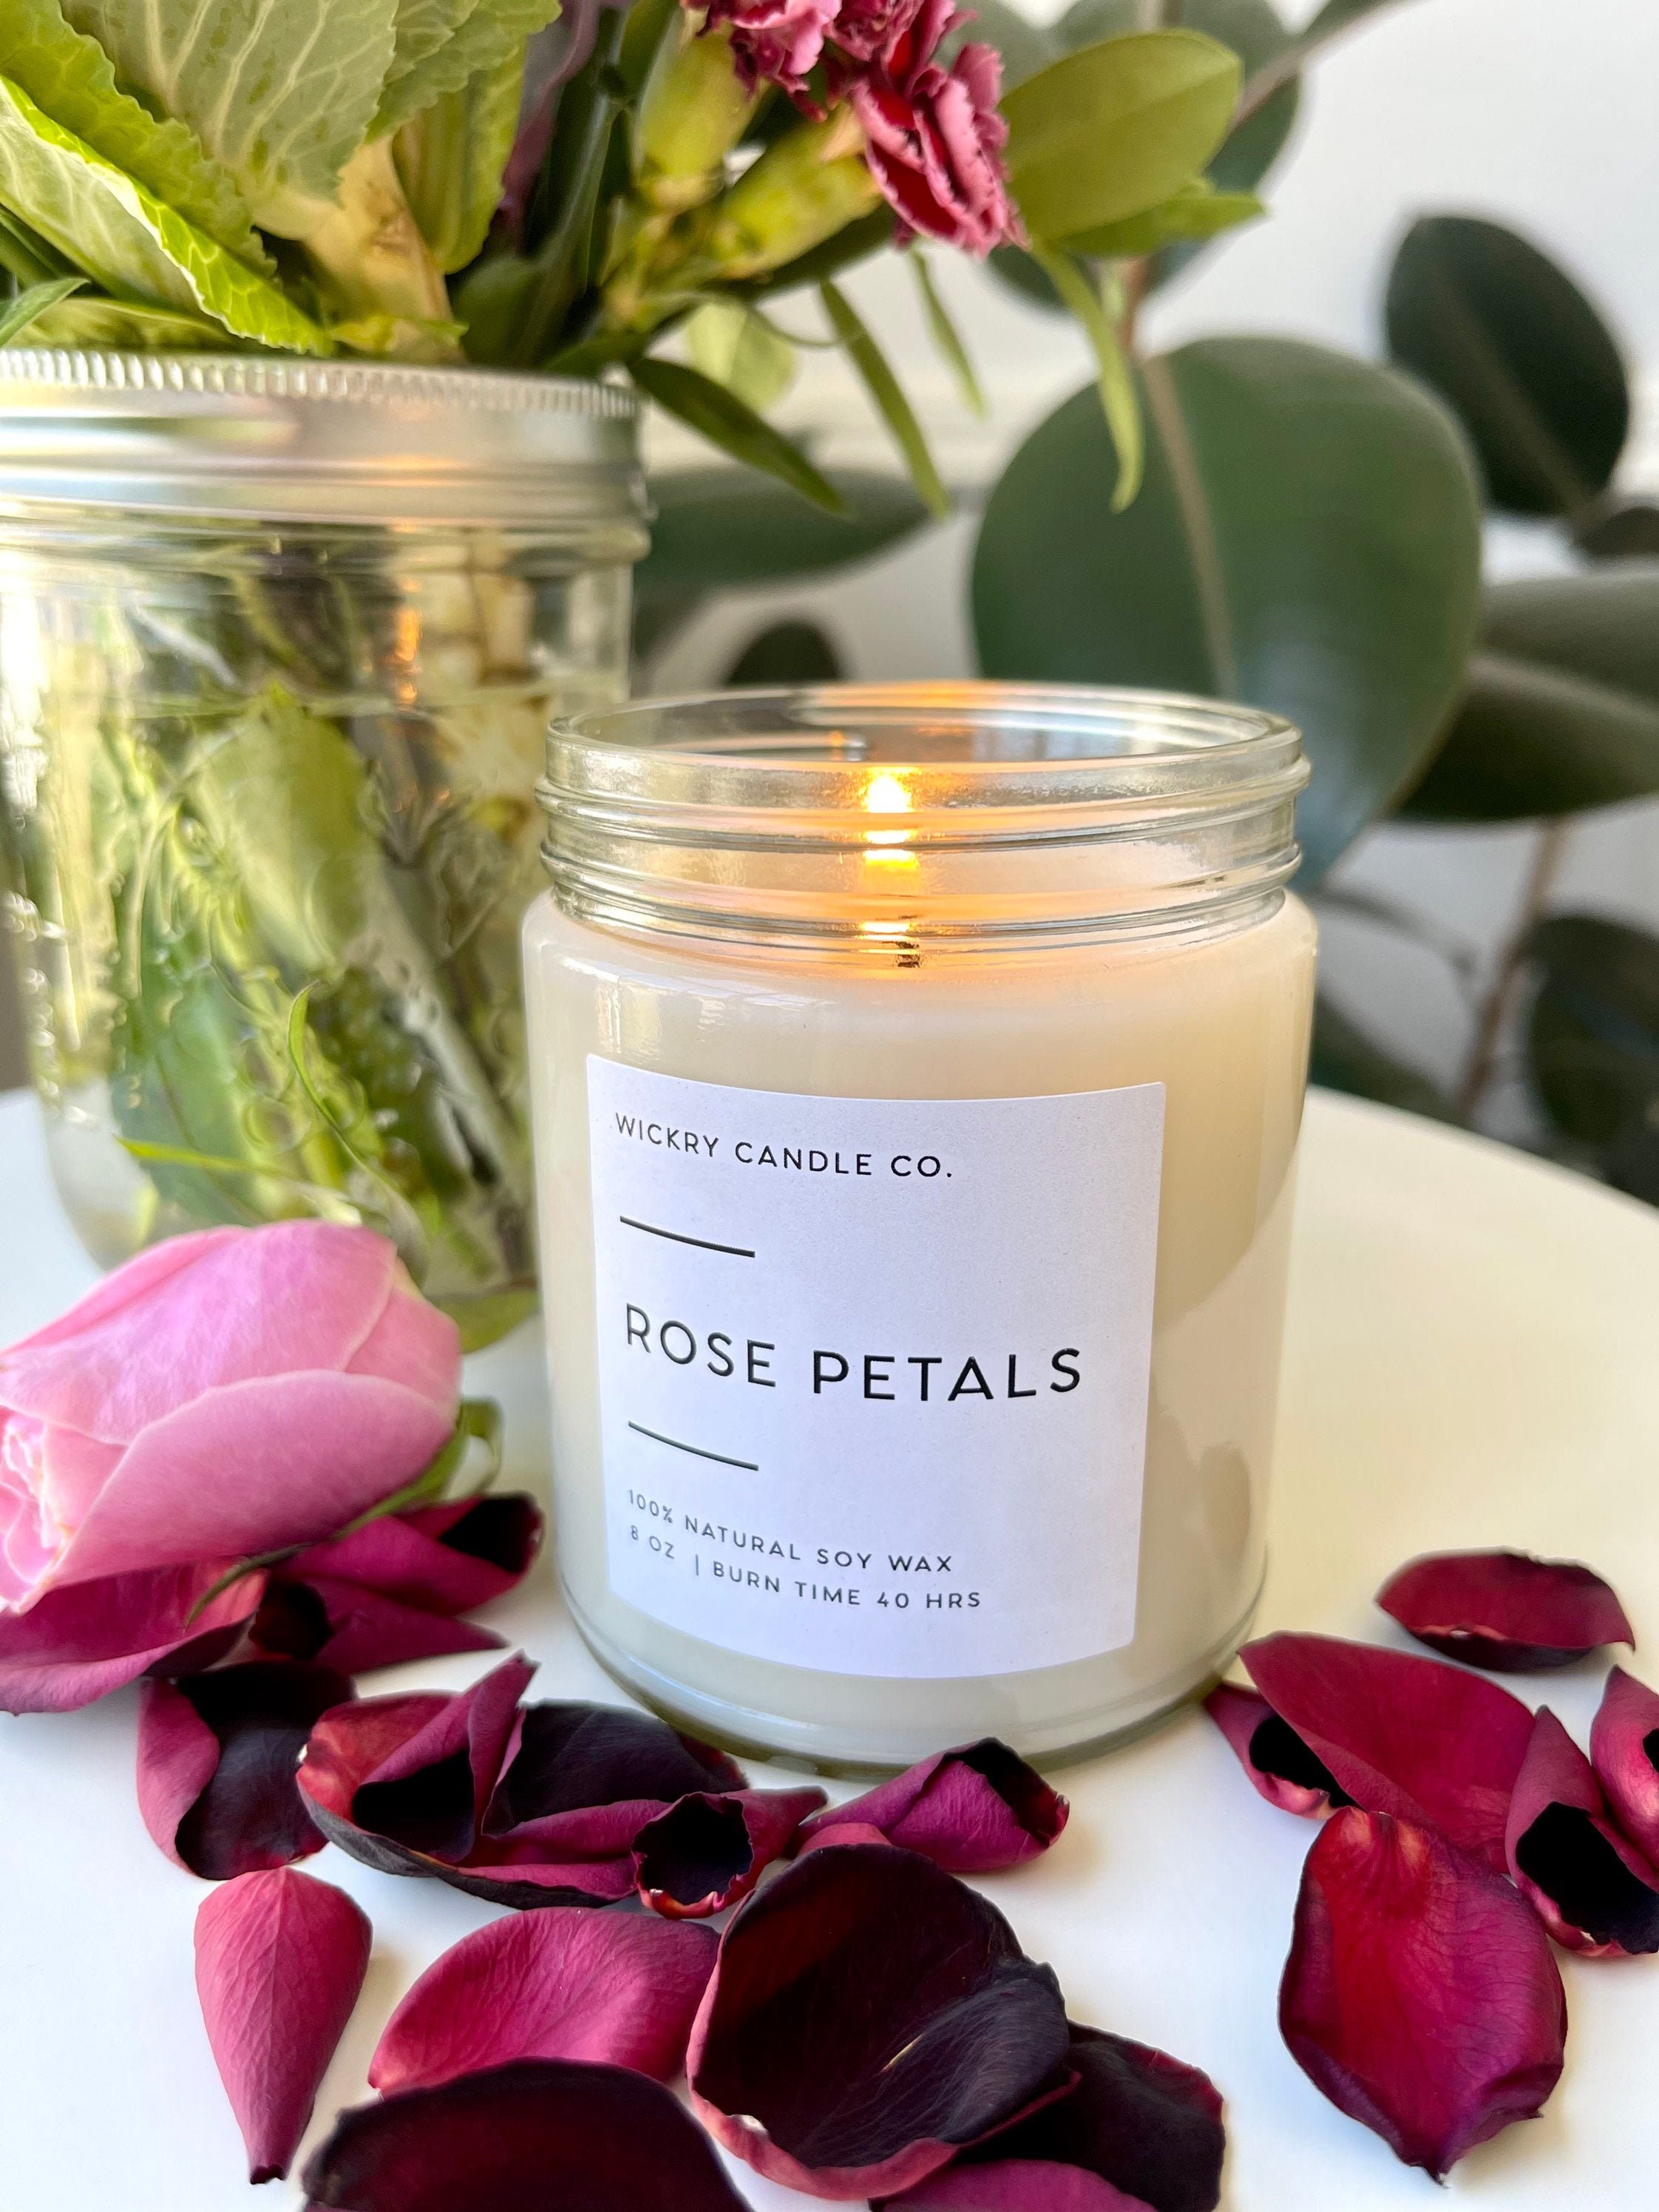 Buy 100% Pure Rose Scented Candle Jar - Desifavors